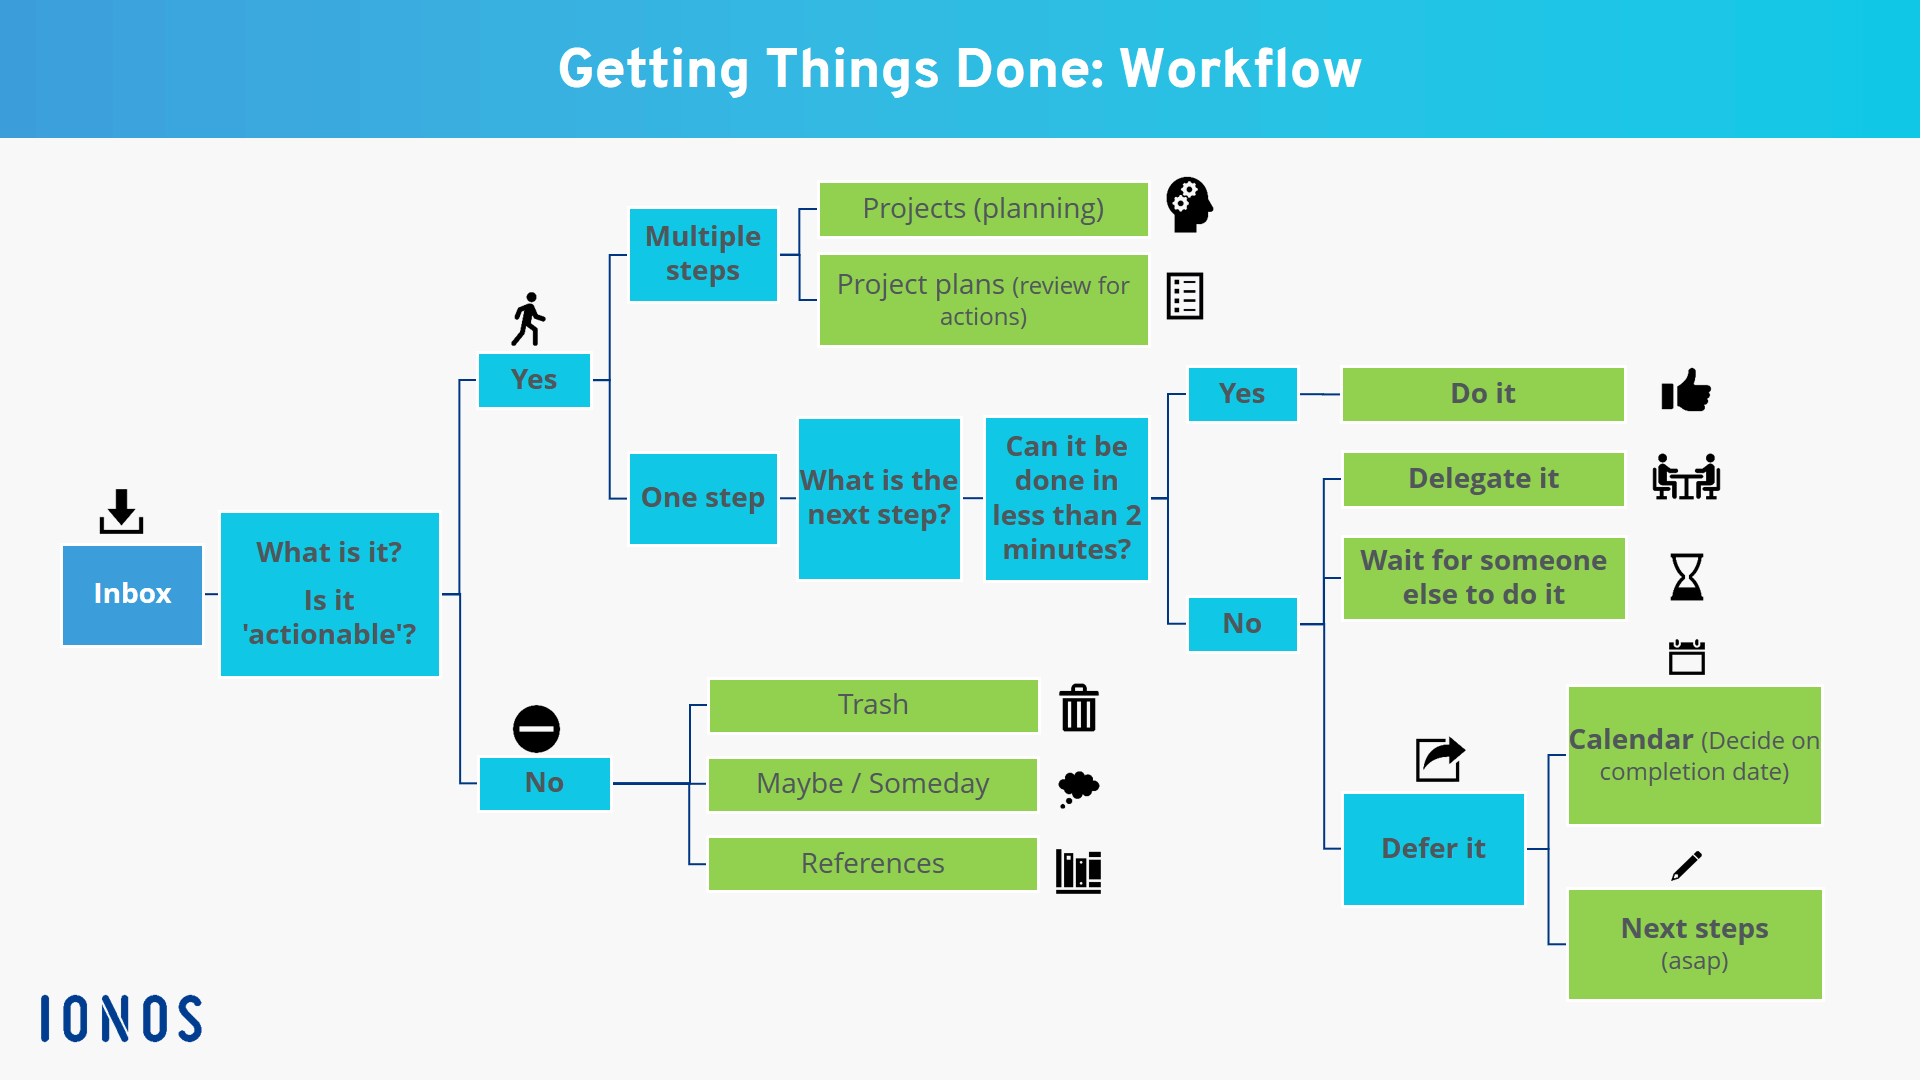 The Getting Things Done workflow